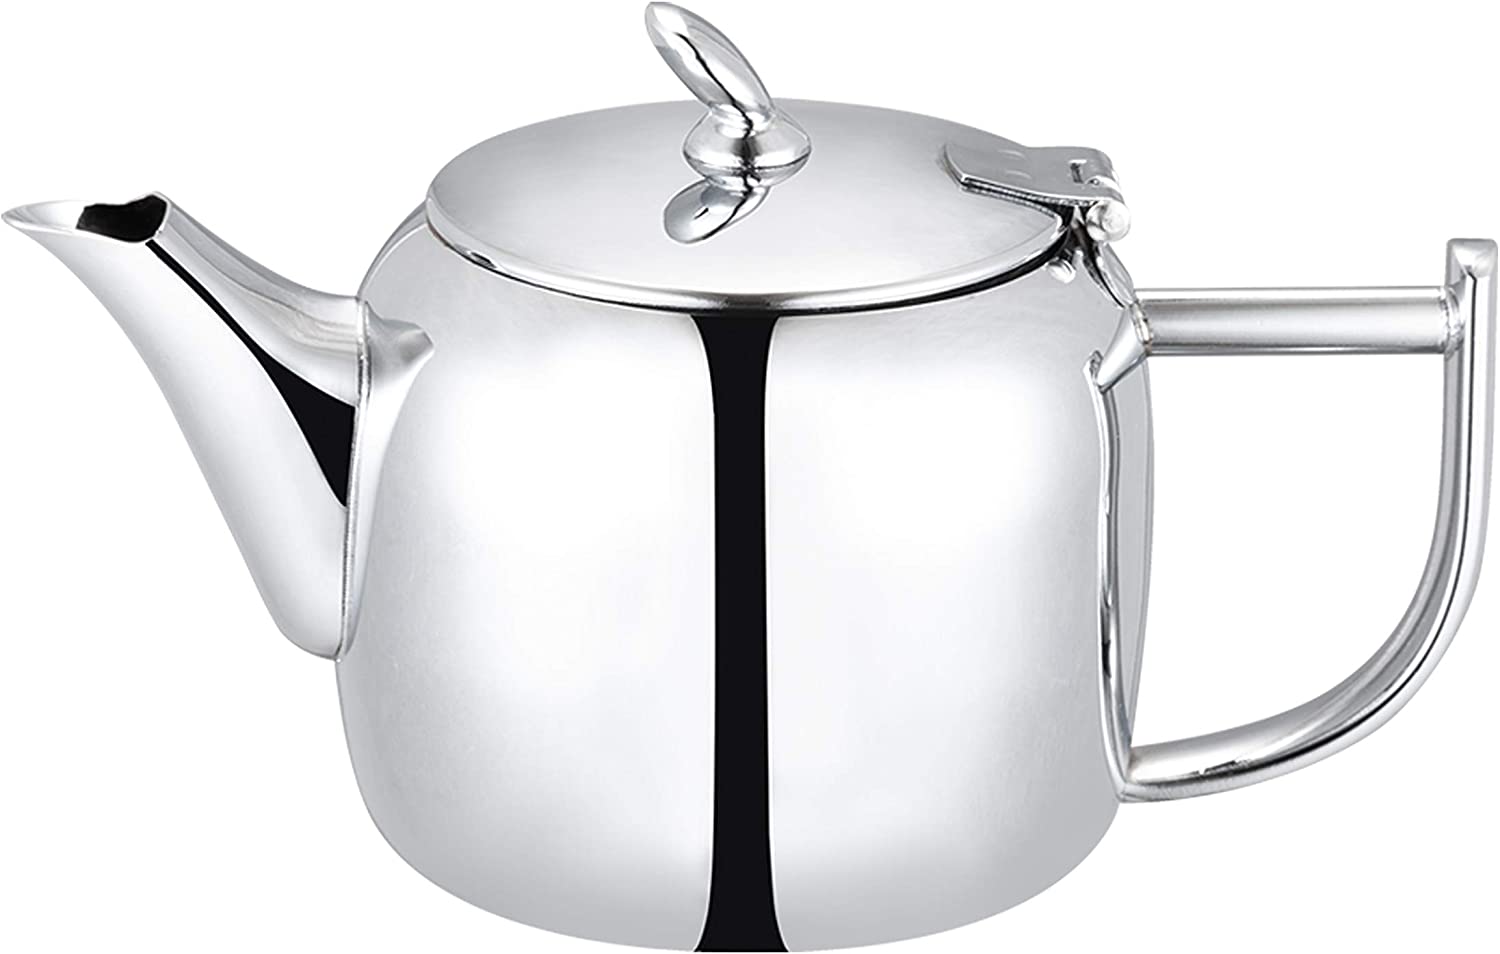 Cafe Ole Café Olé CHT-035 Chatsworth Teapot with Unique Lid Made of High Quality 18/10 Stainless Steel - High Gloss Polish, 35oz, Drip Free Casting, Stainless Steel, 35 Ounces